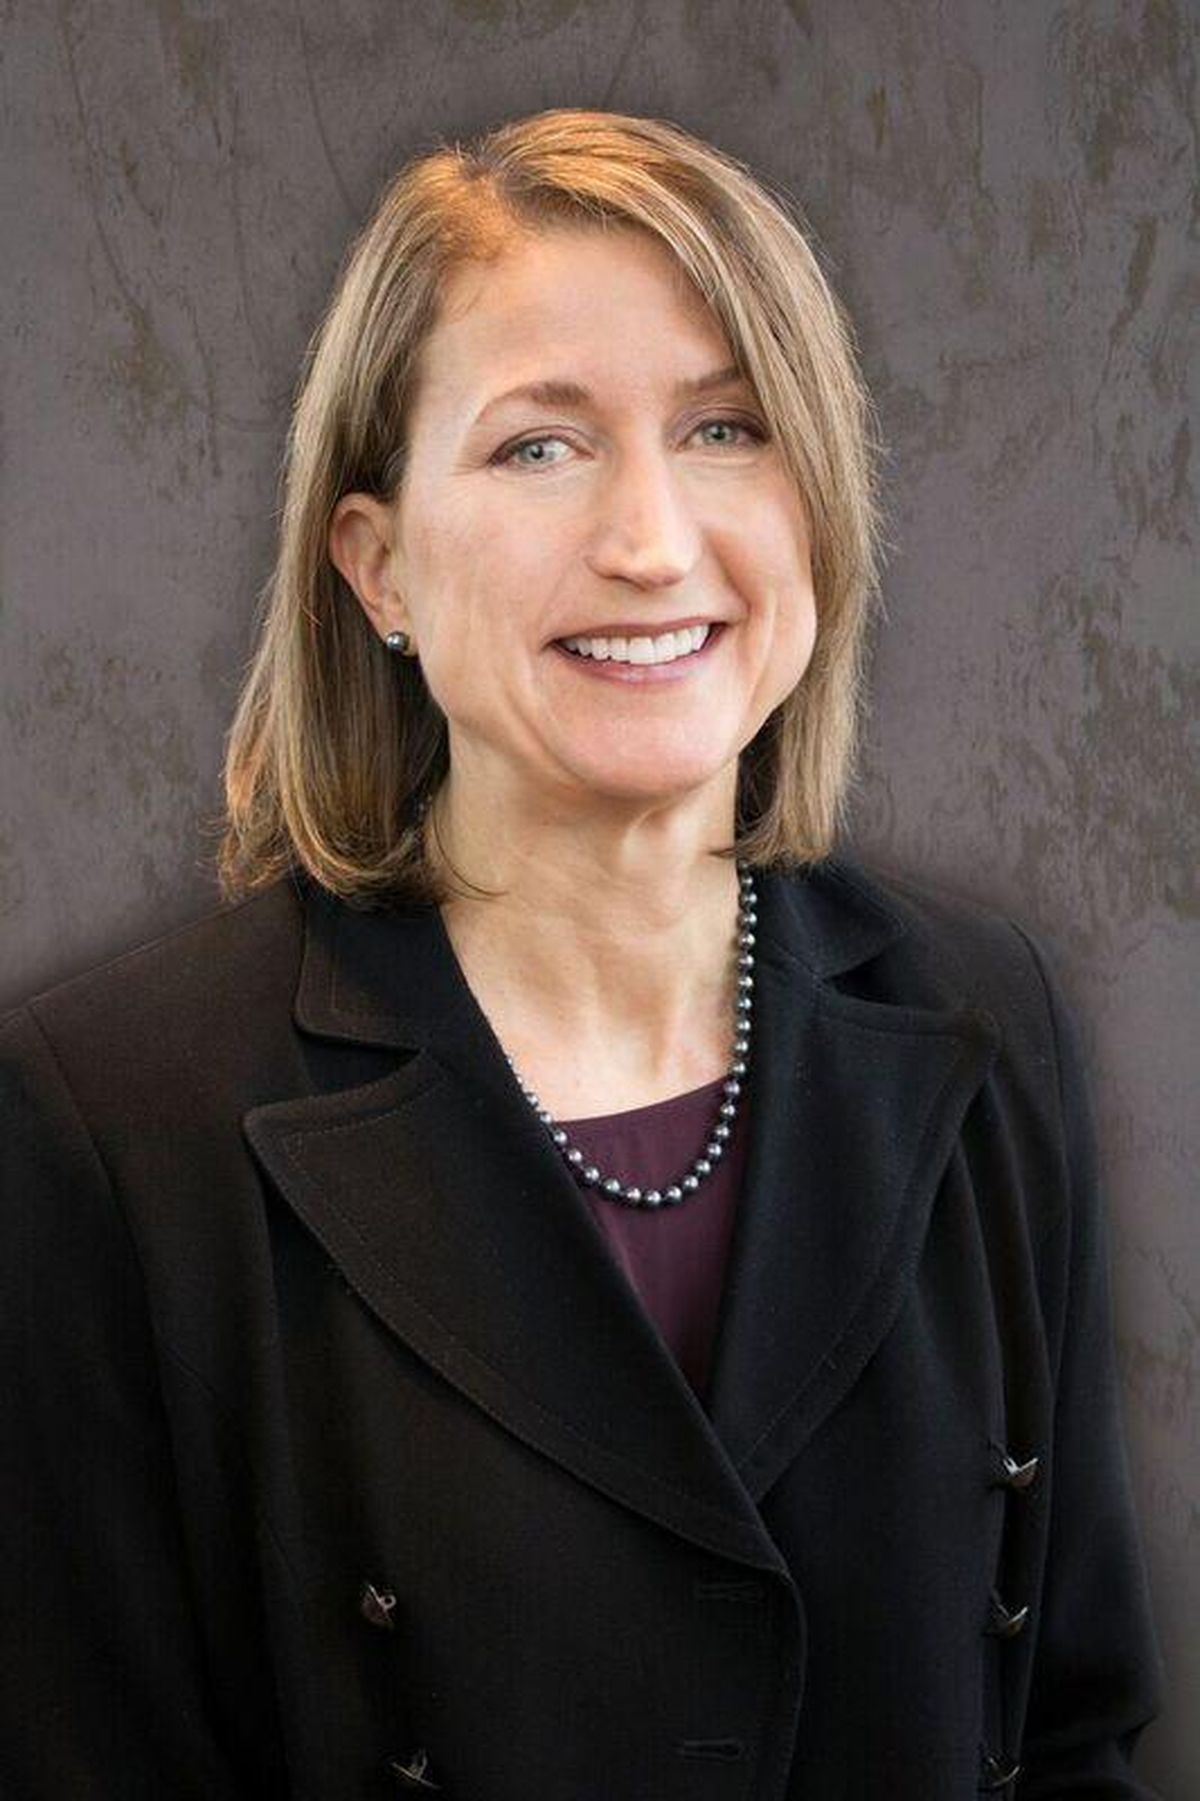 Collette Leland, principal at Winston & Cashatt, has been named Rising Star by Super Lawyers Magazine. (COURTESY PHOTO)